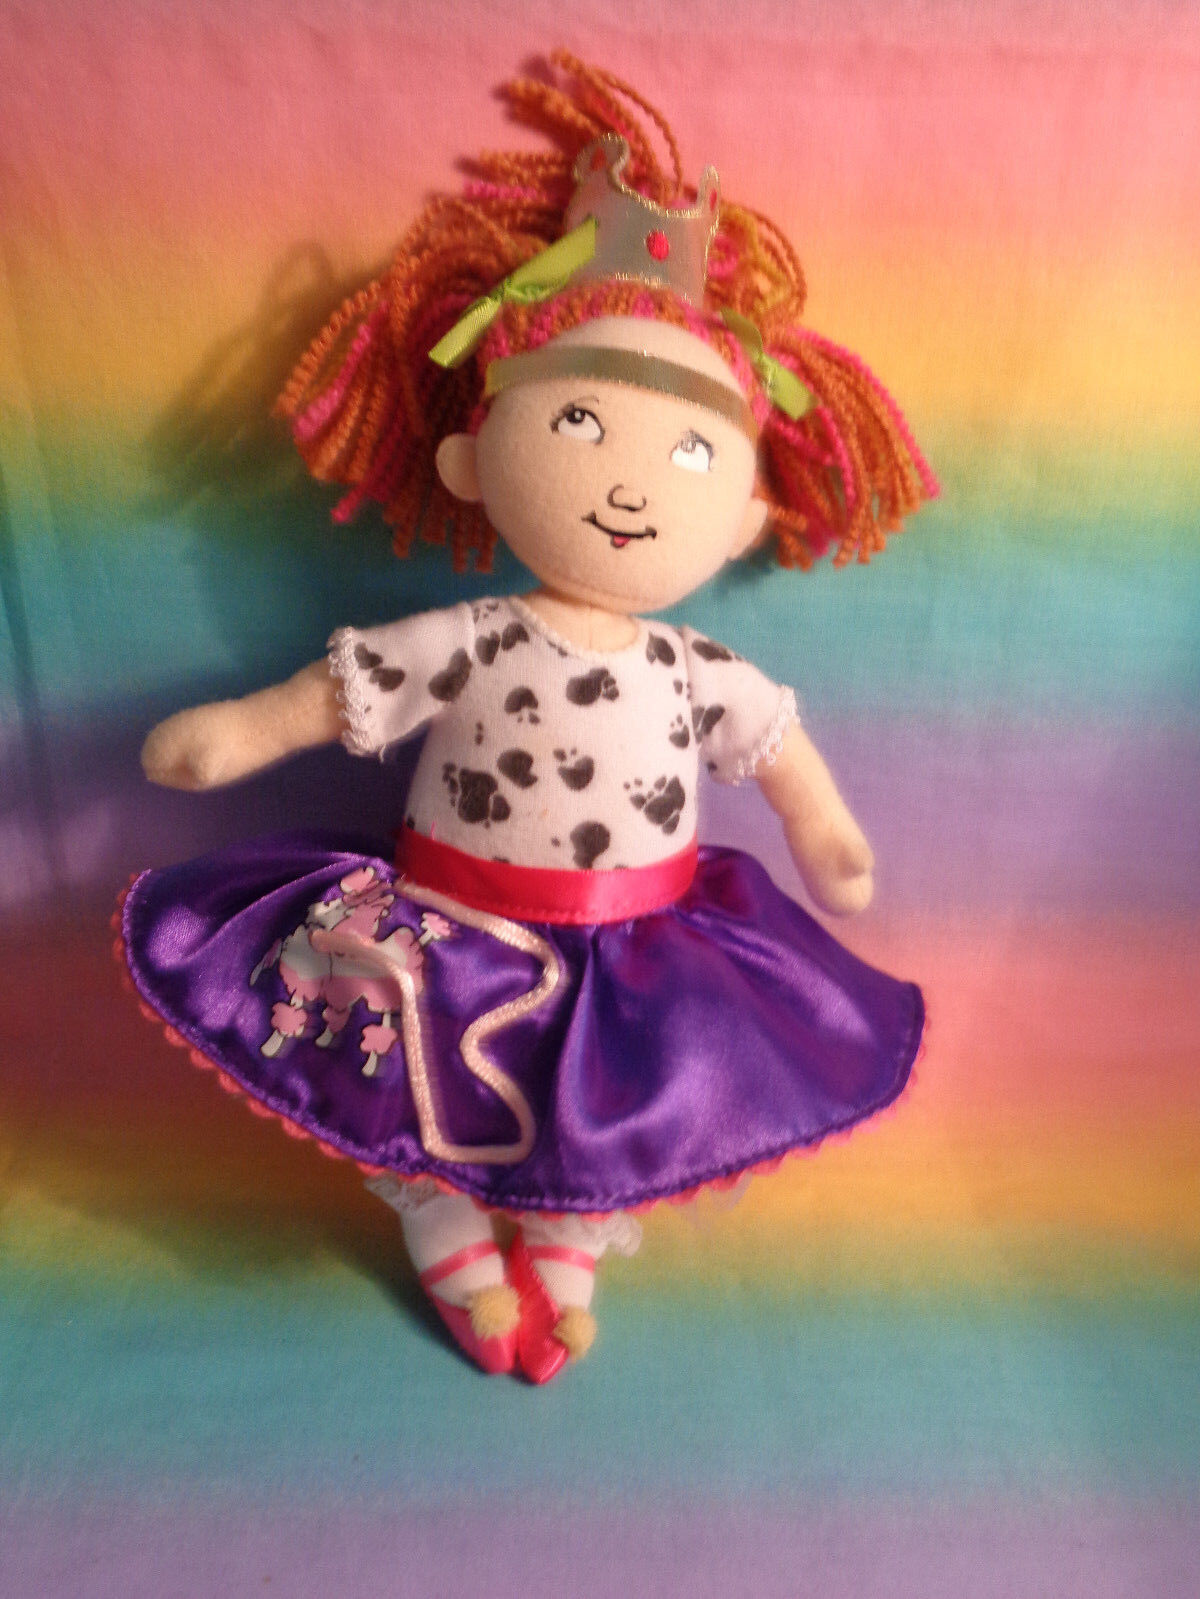 Primary image for Madame Alexander Fancy Nancy Small Soft Plush Baby Doll w/ Poodle Skirt